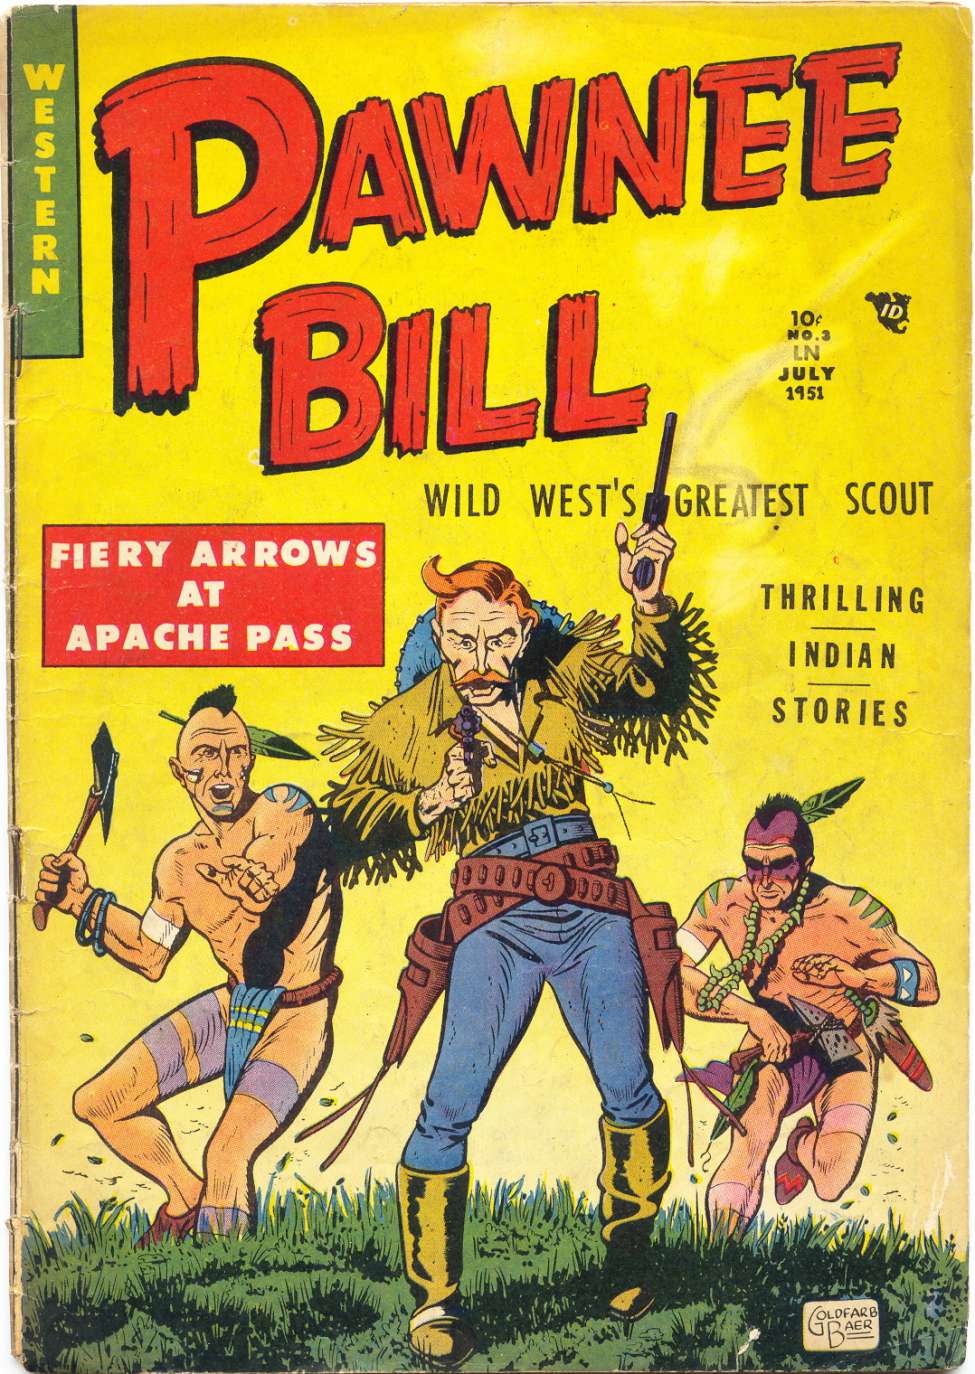 Book Cover For Pawnee Bill 3